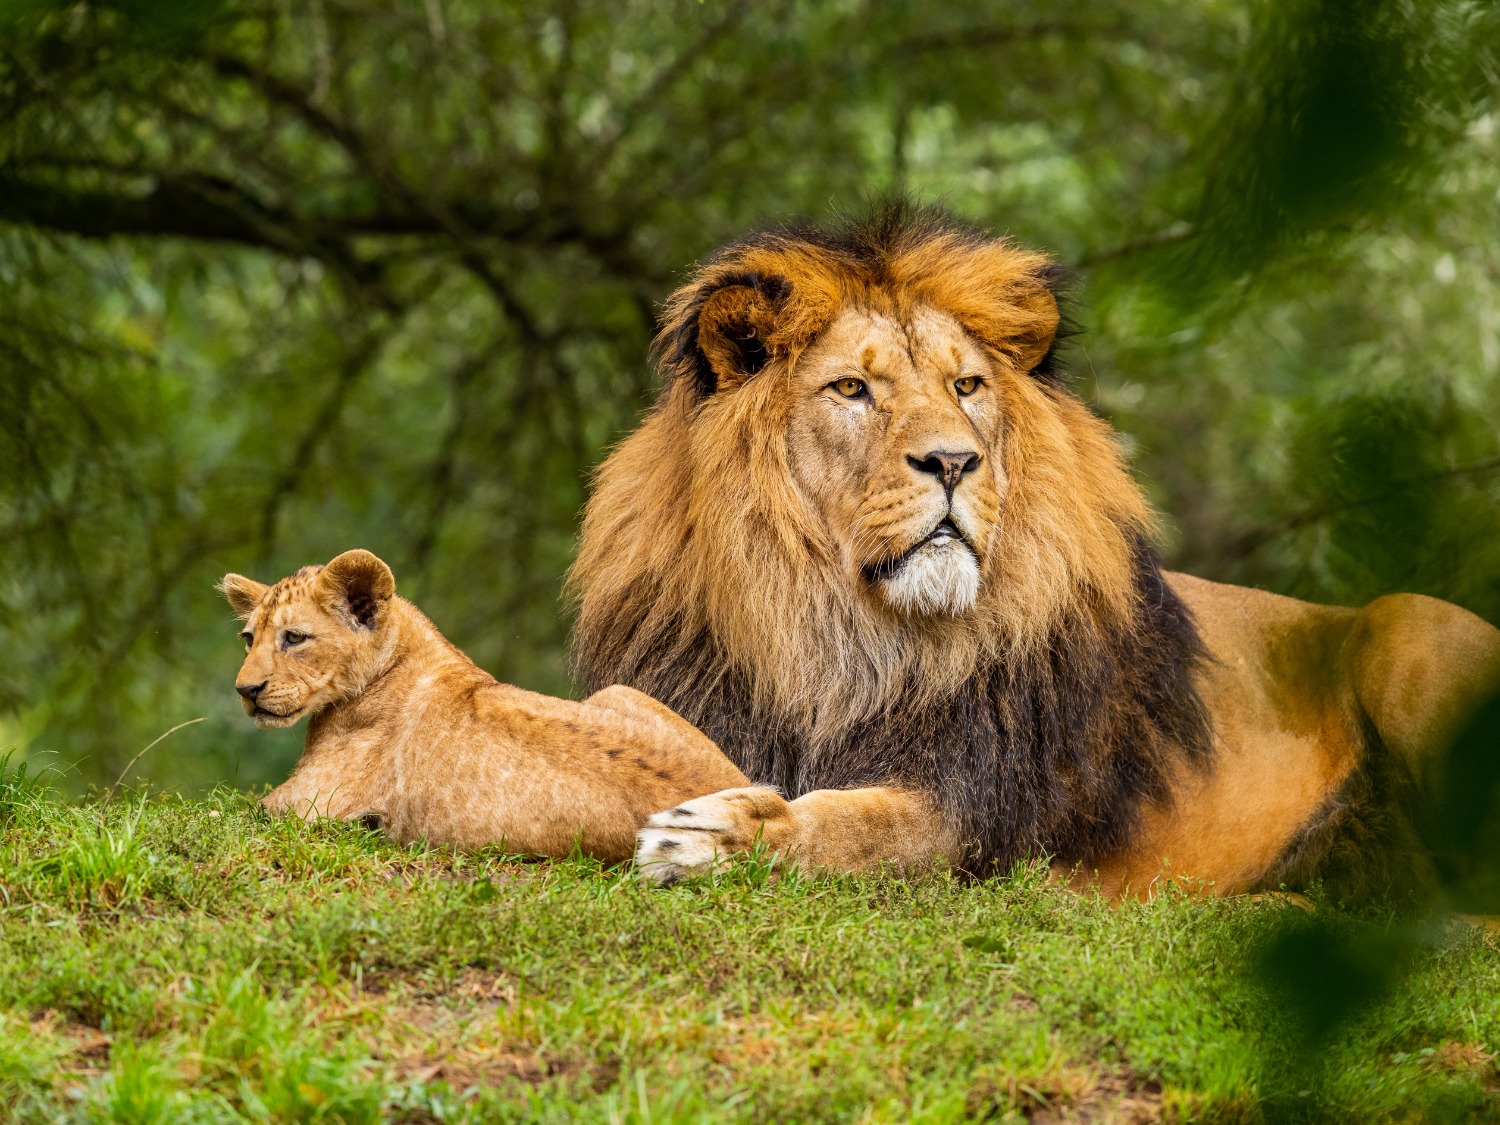 Lion and lion cub on green grass